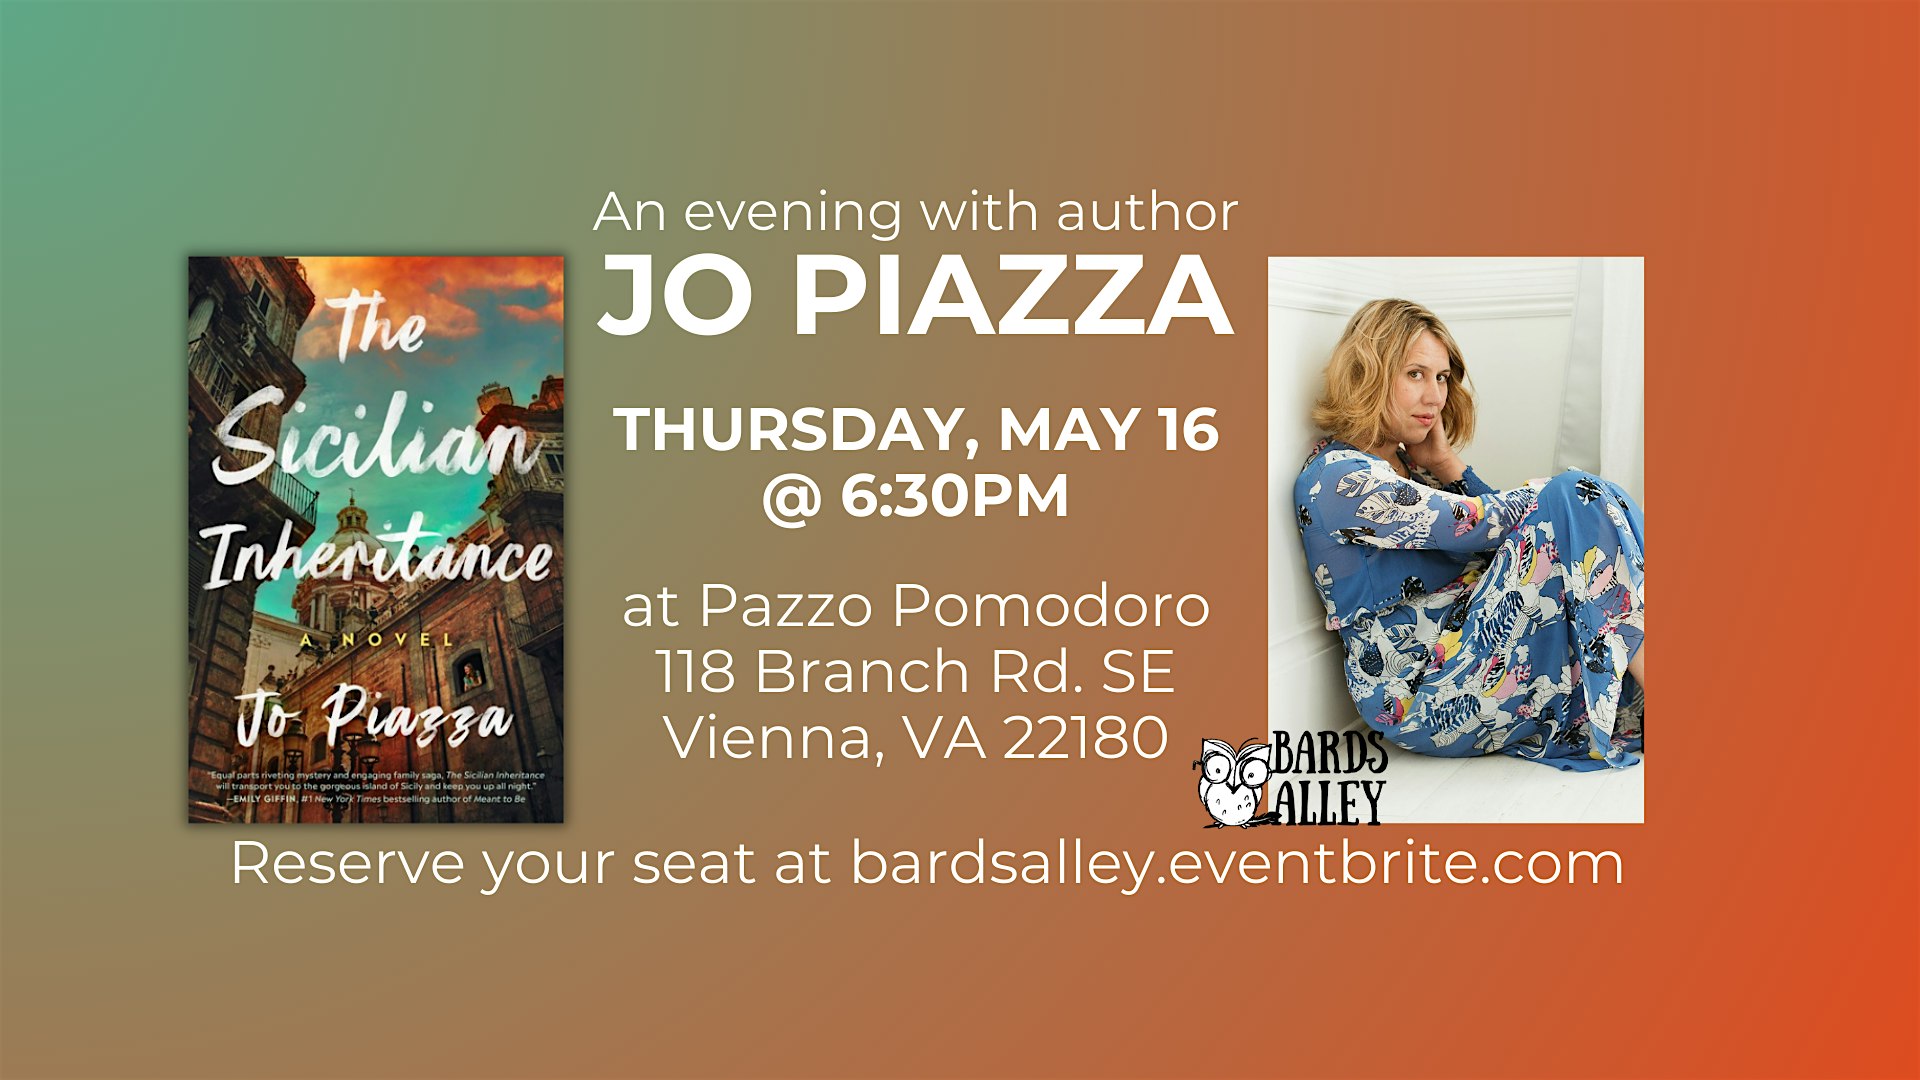 An Evening with Author Jo Piazza | THE SICILIAN INHERITANCE